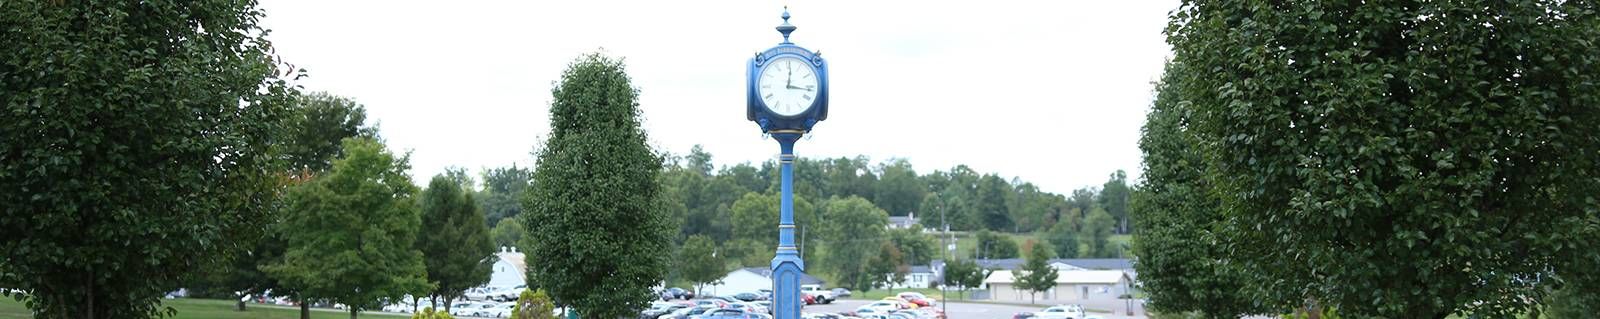 A photo of the blue clocktower on the West Virginia University at Parkersburg campus.